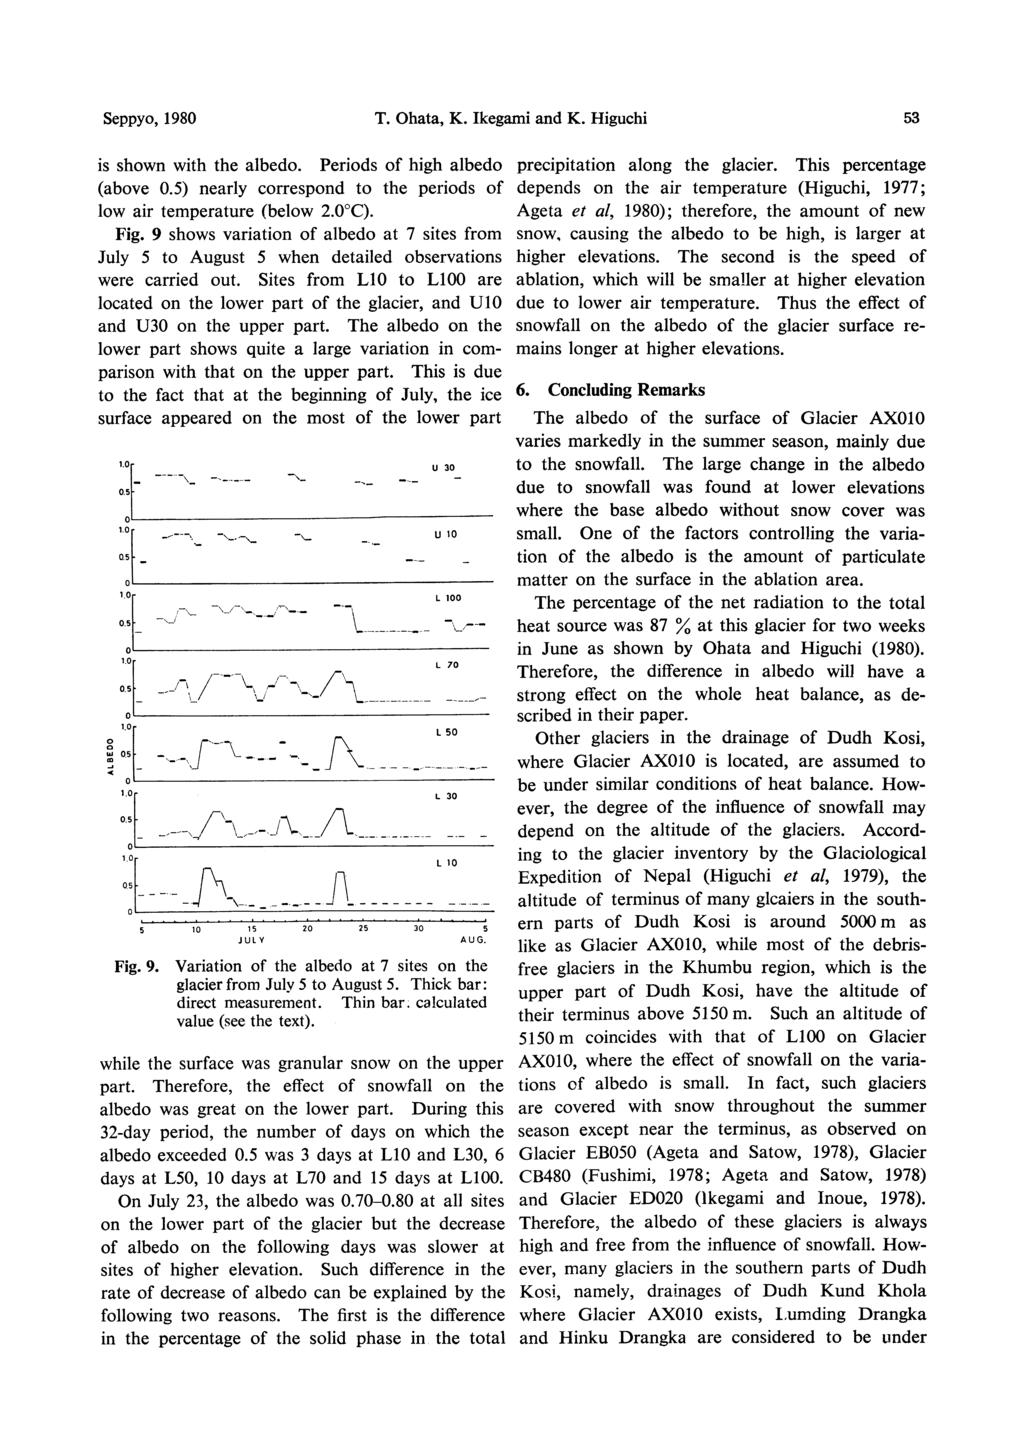 Seppyo, 1980 T. Ohata, K. Ikegami and K. Higuchi 53 is shown with the albedo. Periods of high albedo (above 0.5) nearly correspond to the periods of low air temperature (below 2.0 Ž). Fig.